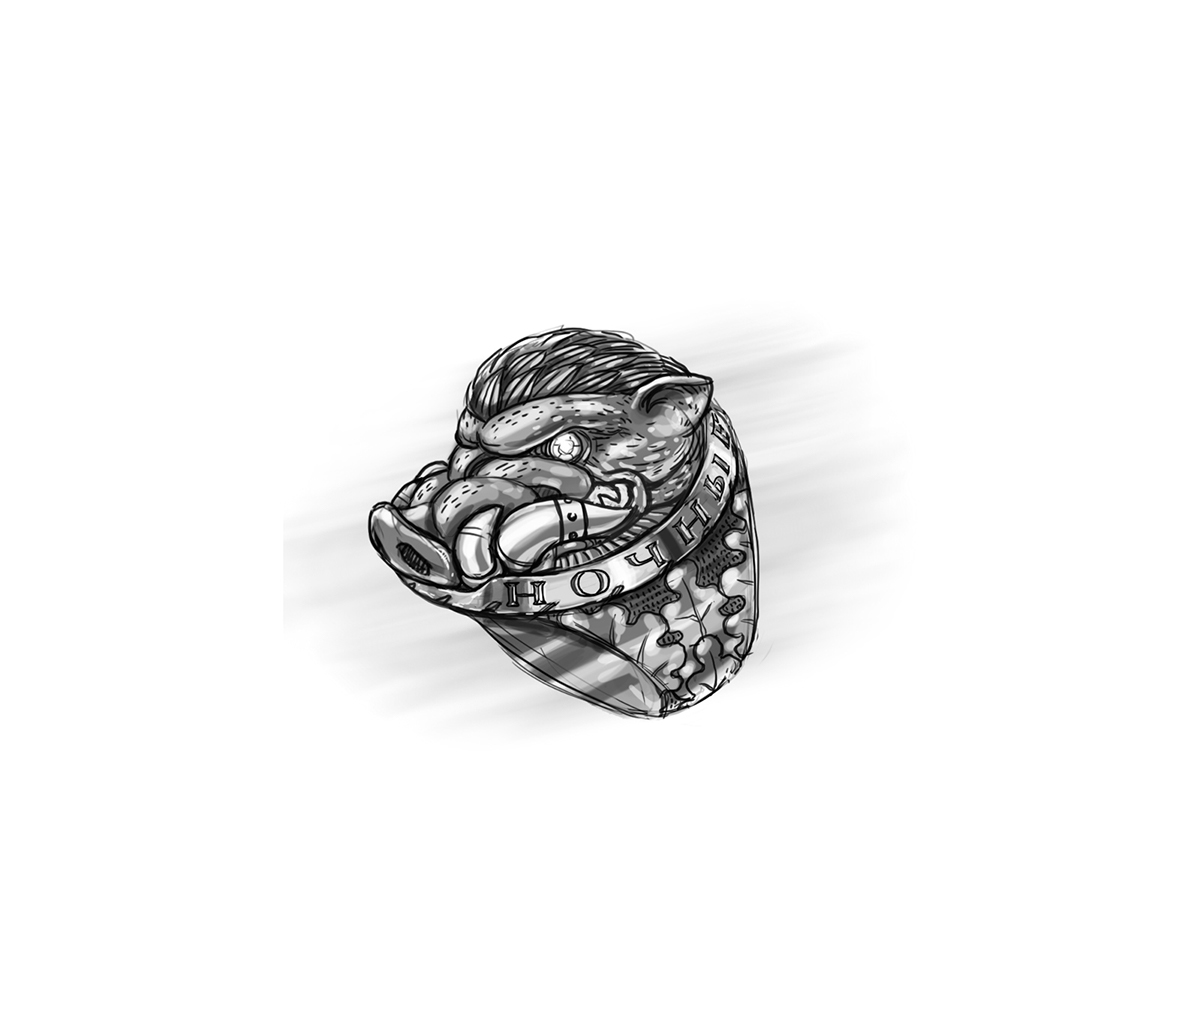 ring design jewelry Pencil drawing concept